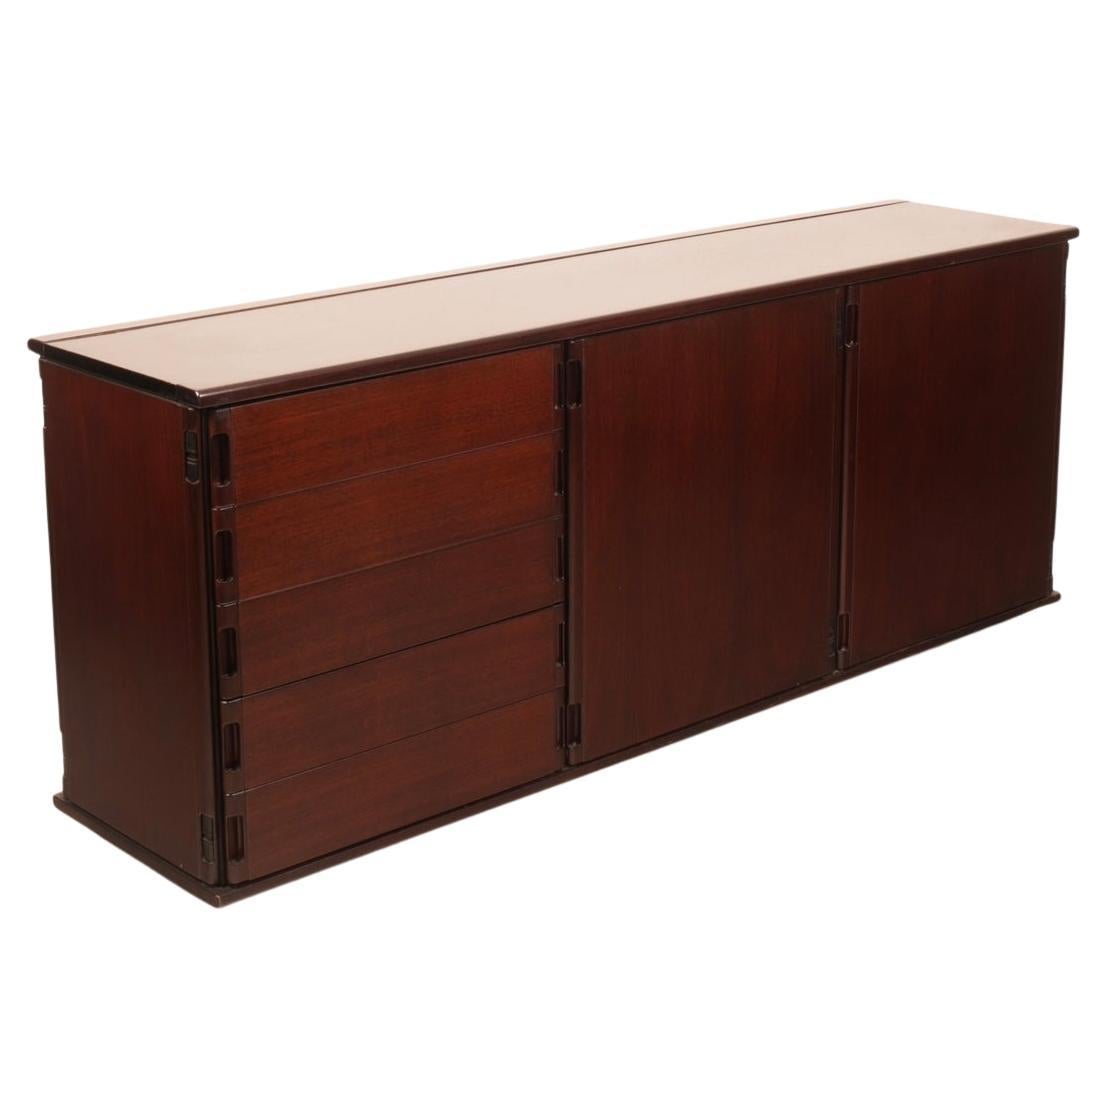 Larco" sideboard by Gianfranco Frattini for Molteni&C